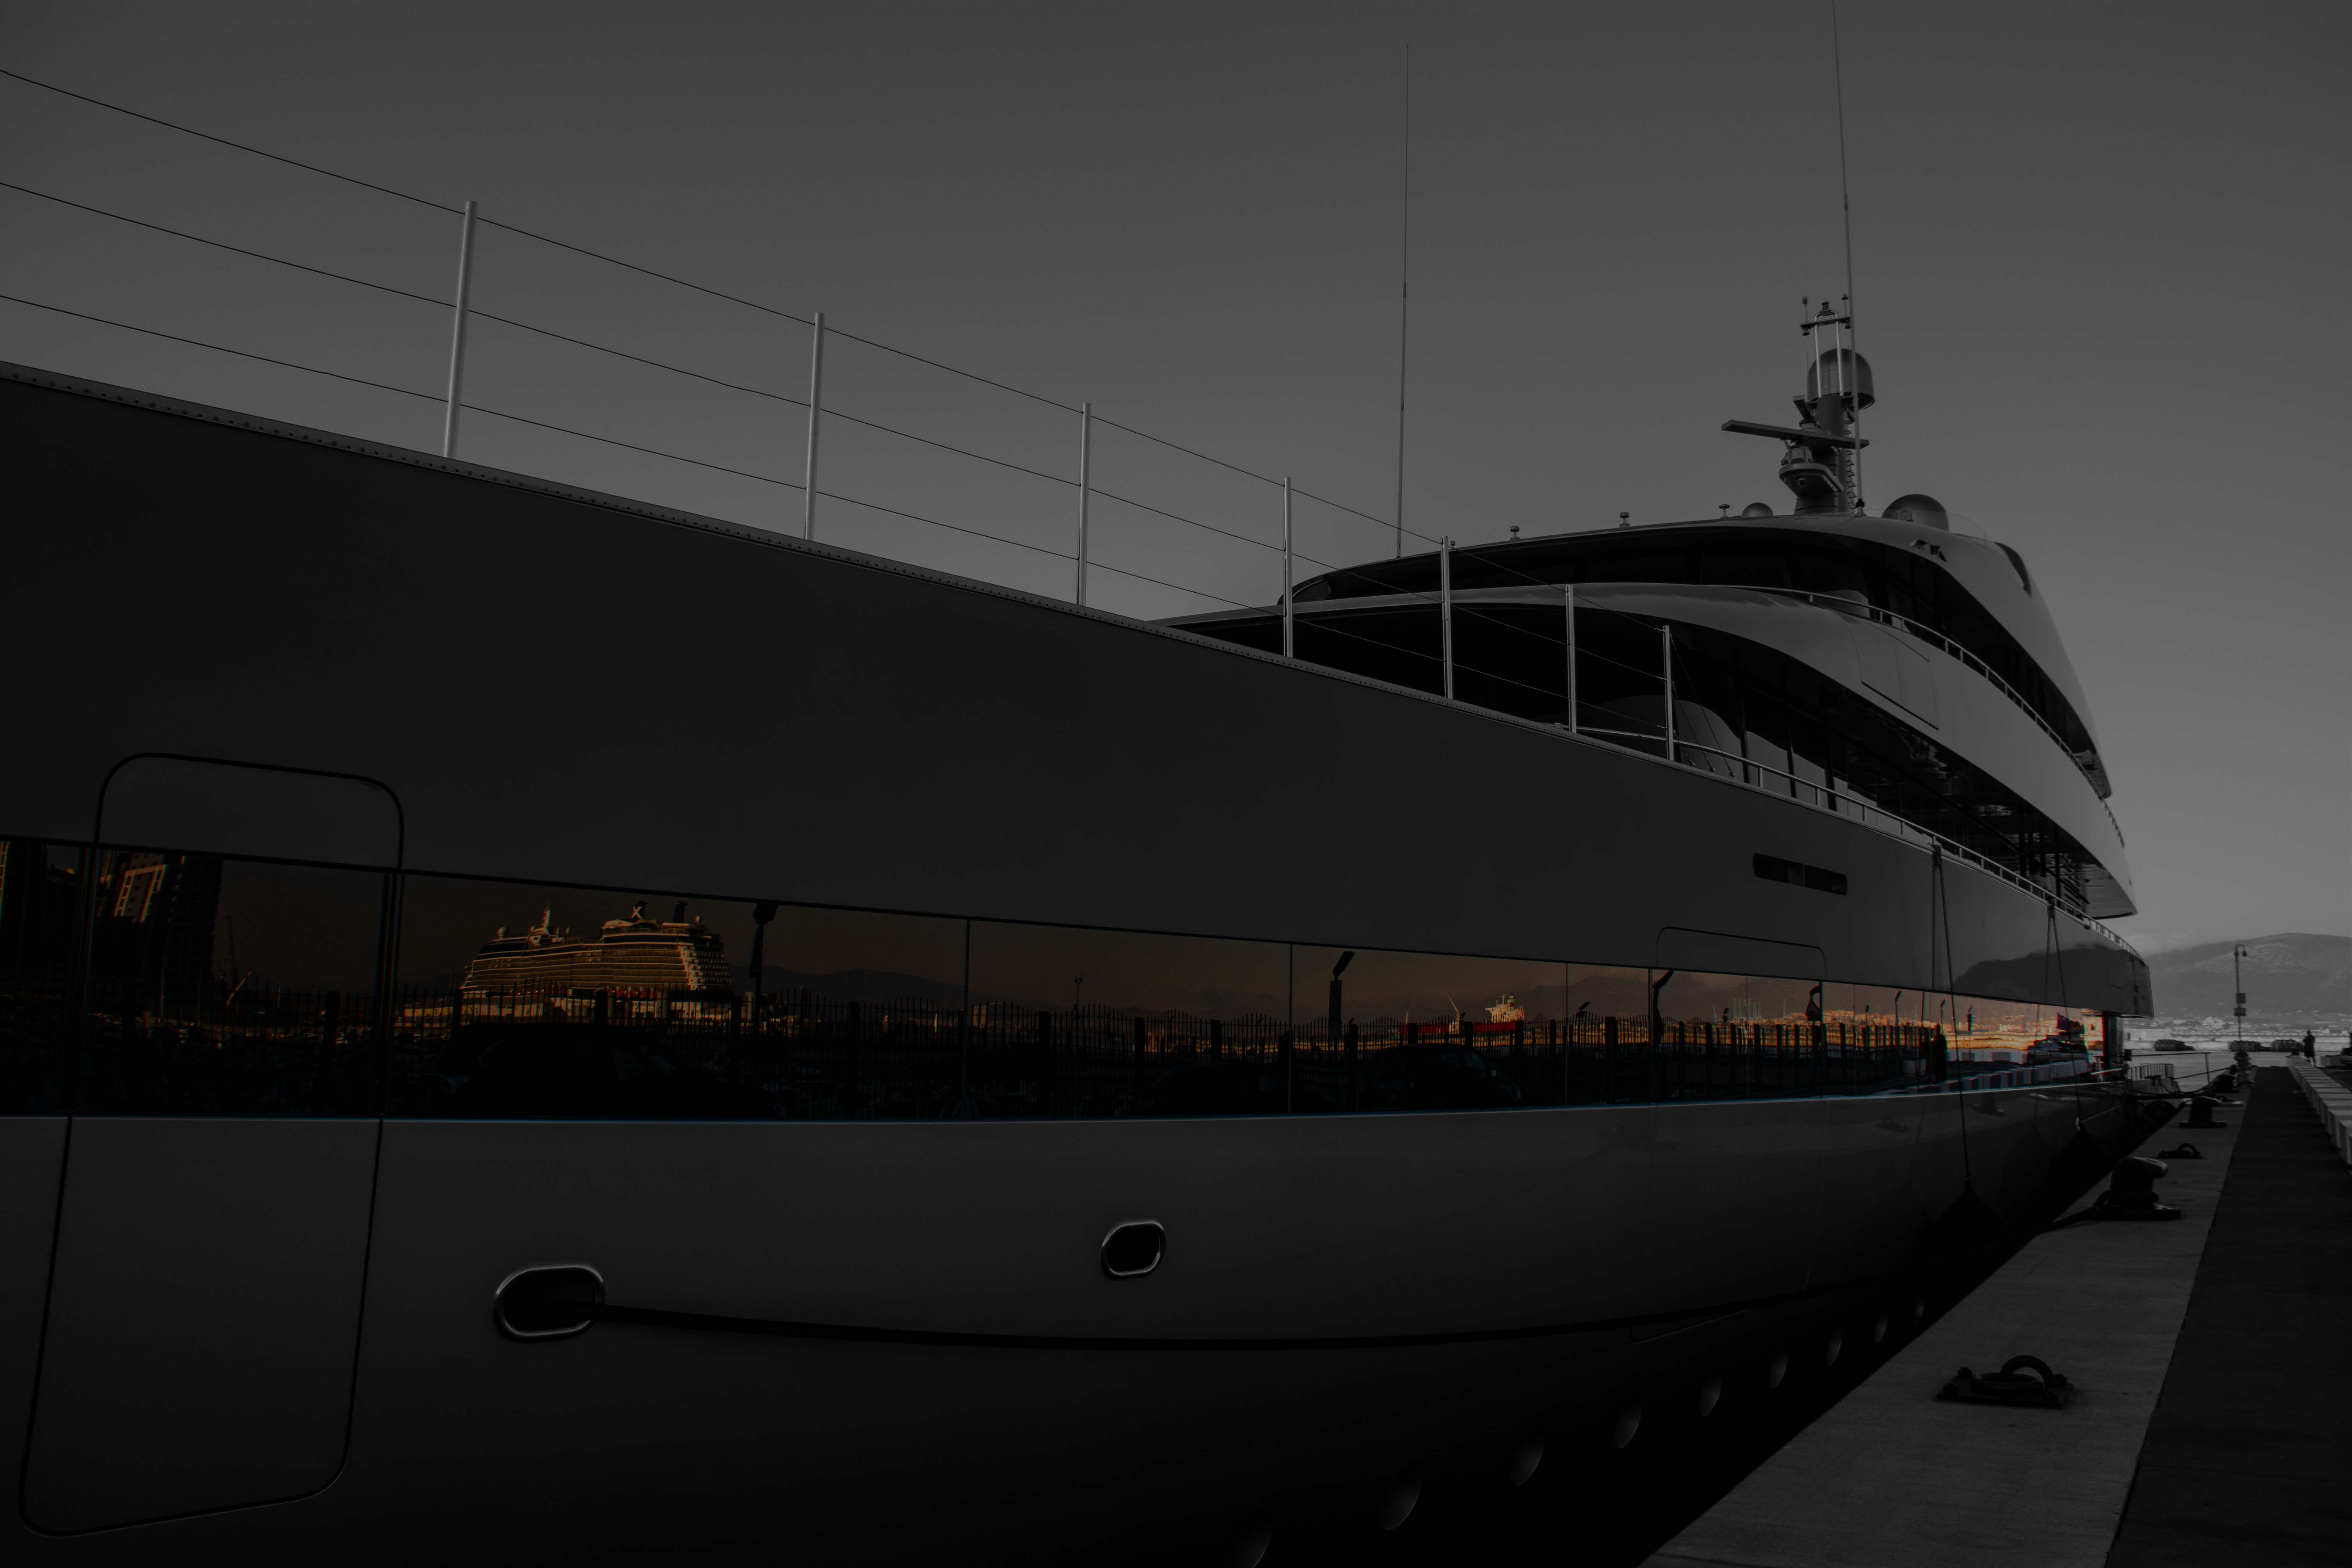 About Superyachts